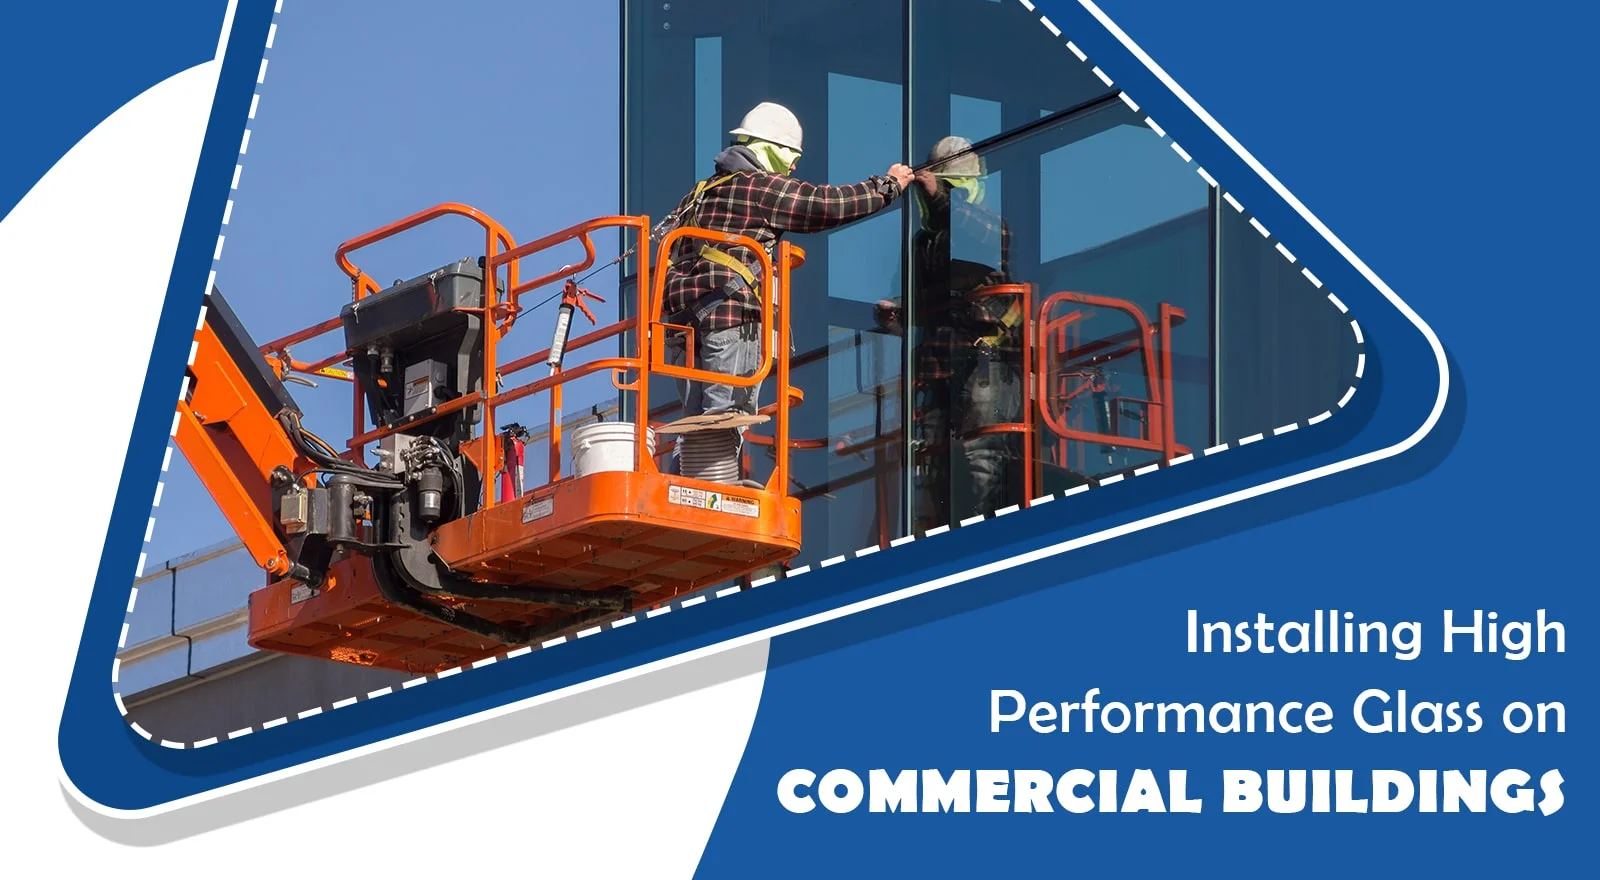 Installing High Performance Glass on Commercial Buildings